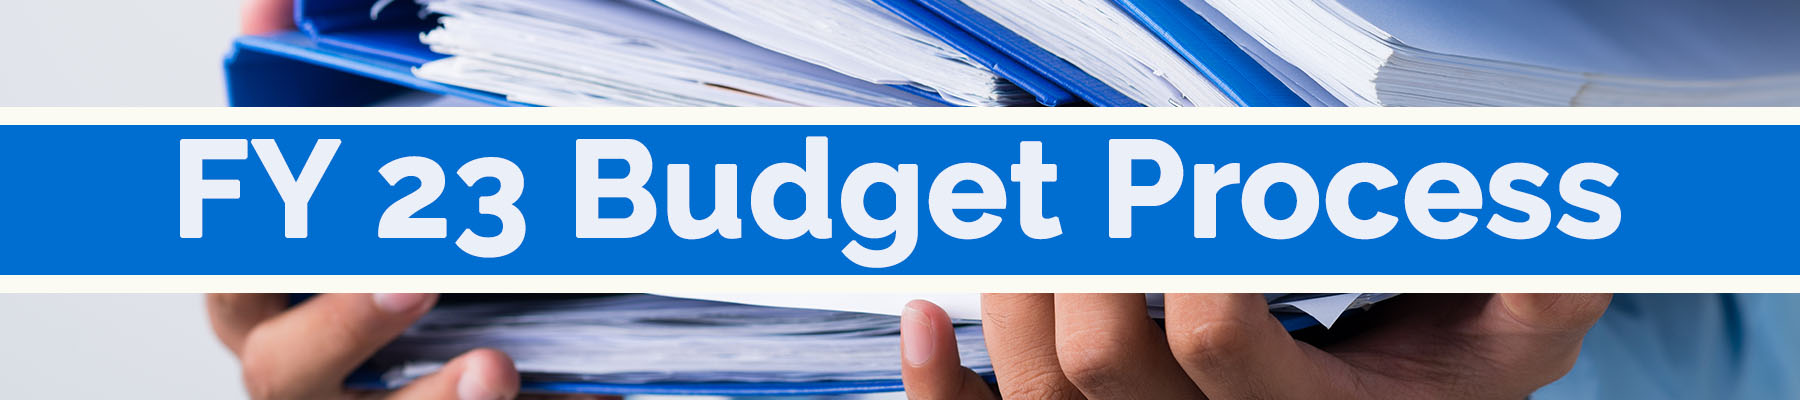 FY2023 Budget Meeting Schedule Announced